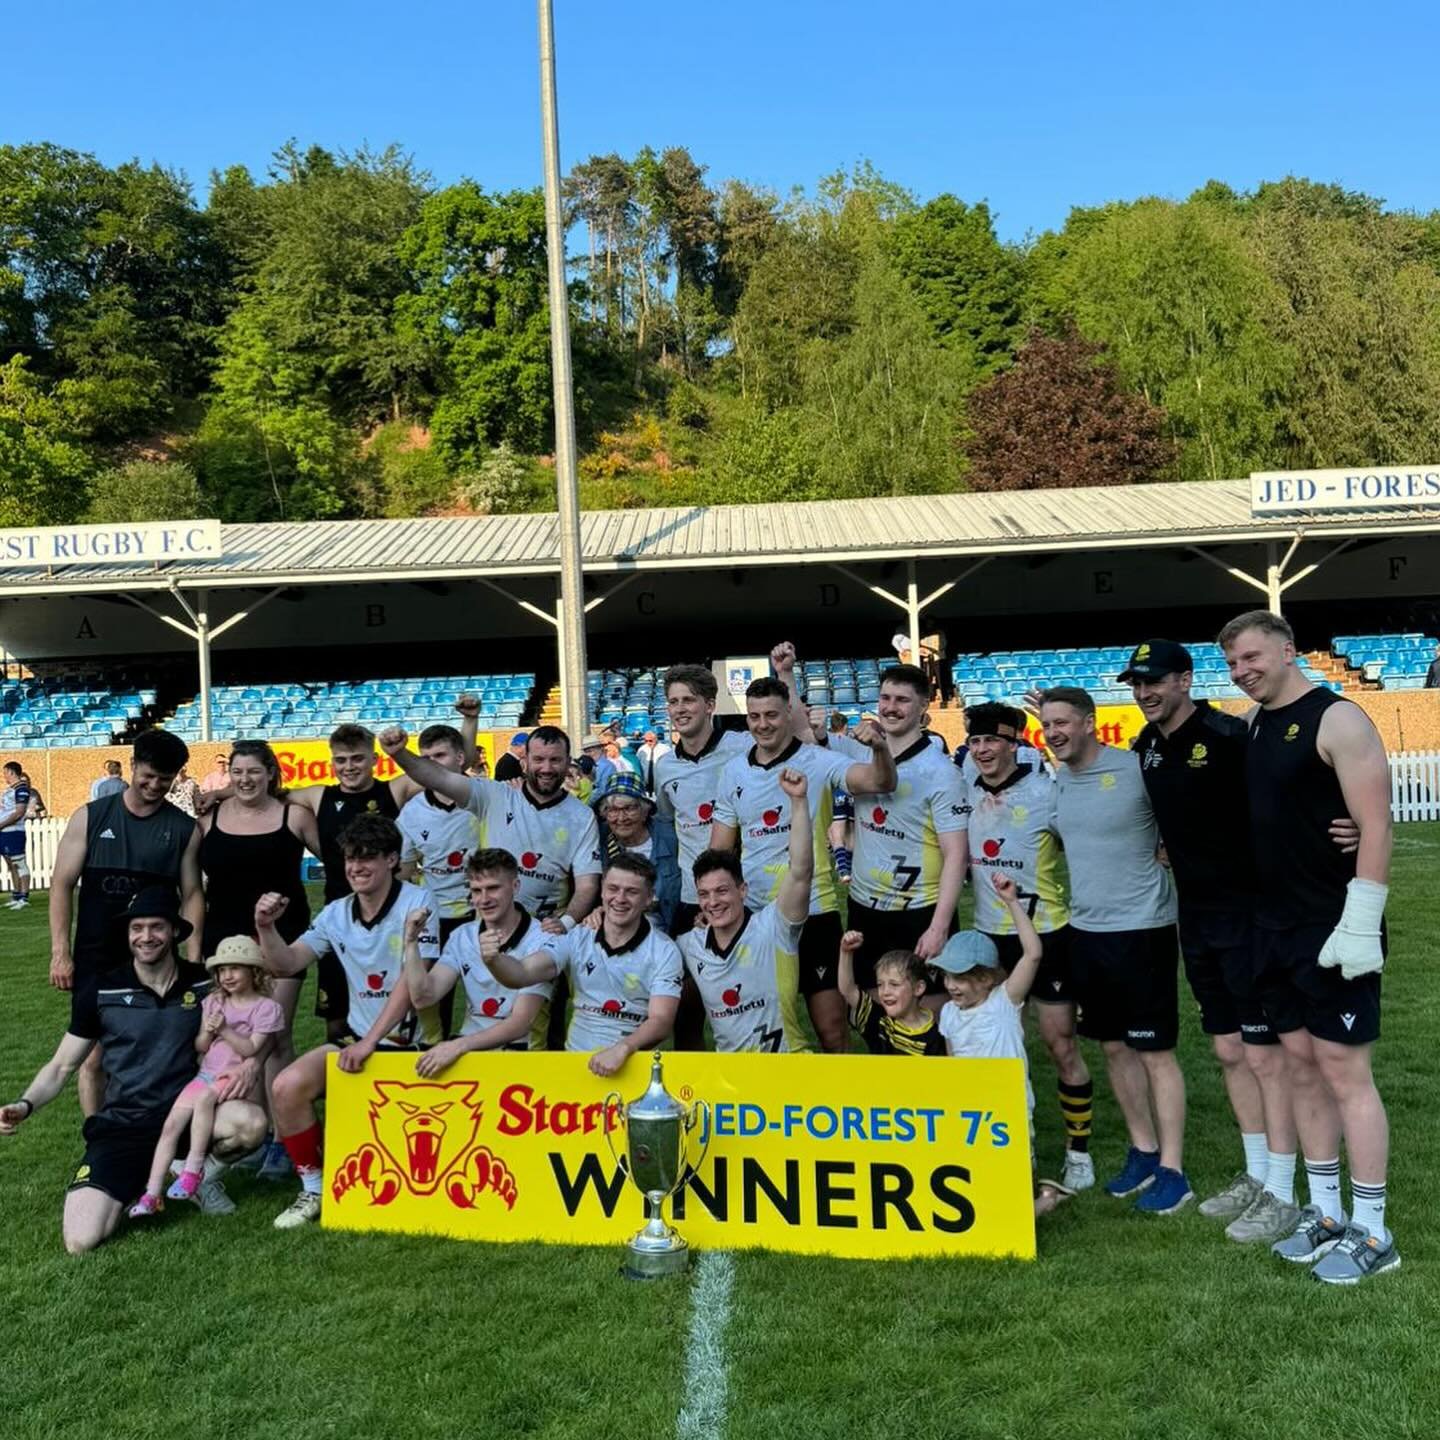 Melrose retain the Jed 7s trophy to finish 2nd in Kings of the 7s 2023/24. 

A great end to the season and a massive effort from everyone involved! 

Player of the Tournament - @harrymakowski 

Melrose 19 - 12 Jed 
Melrose 31 - 24 Edinburgh Universit